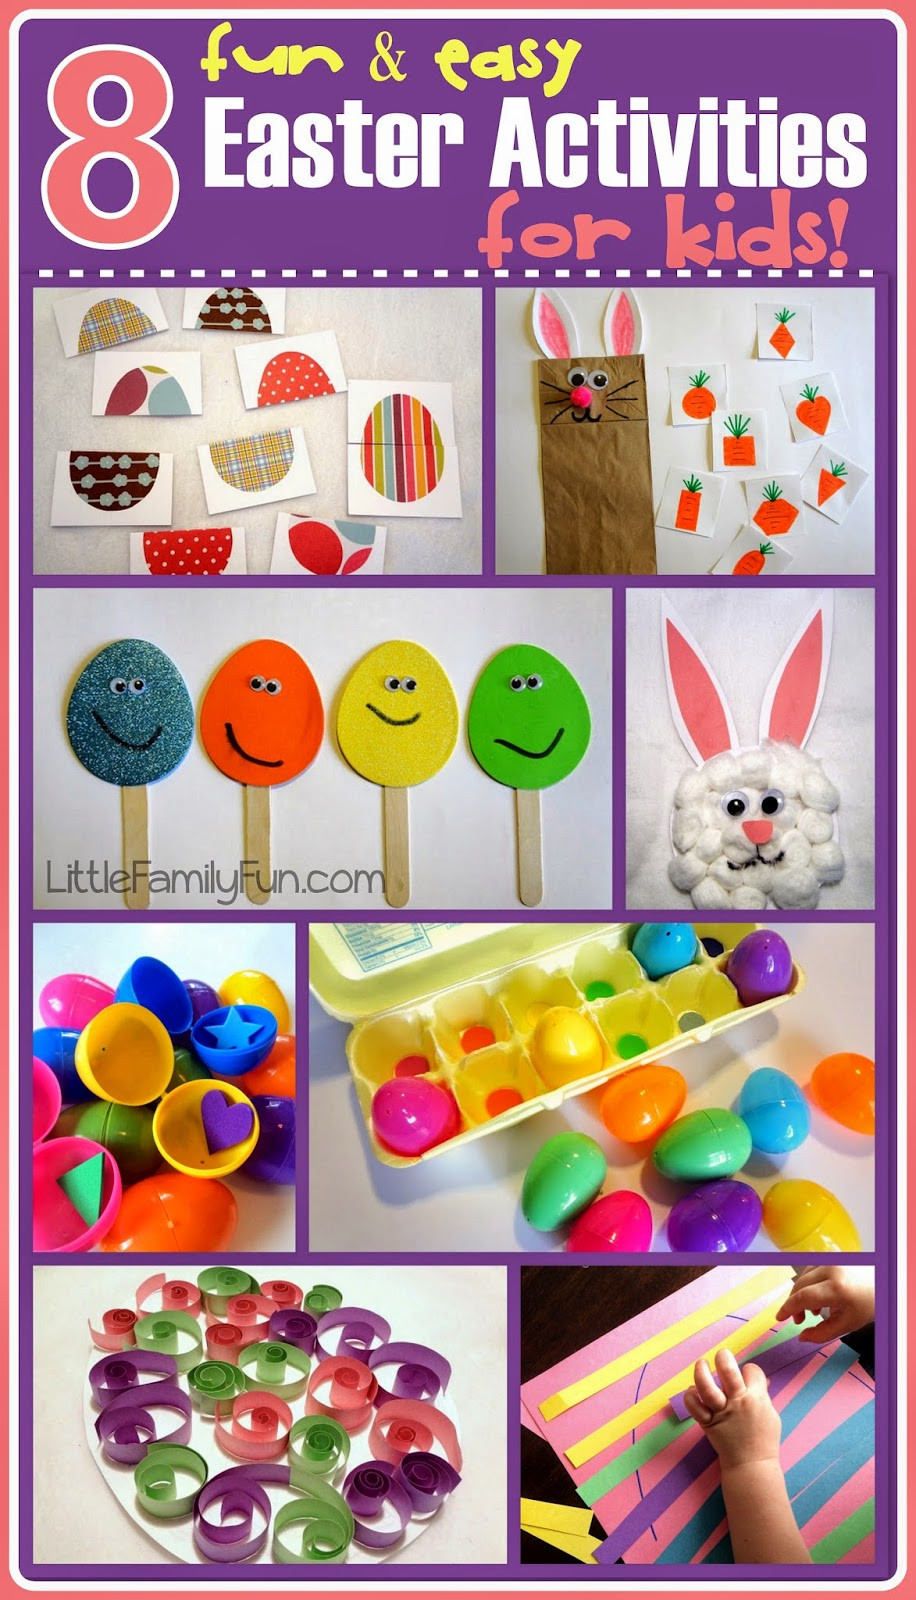 Family Easter Ideas
 Little Family Fun 8 fun & easy Easter Activities for Kids